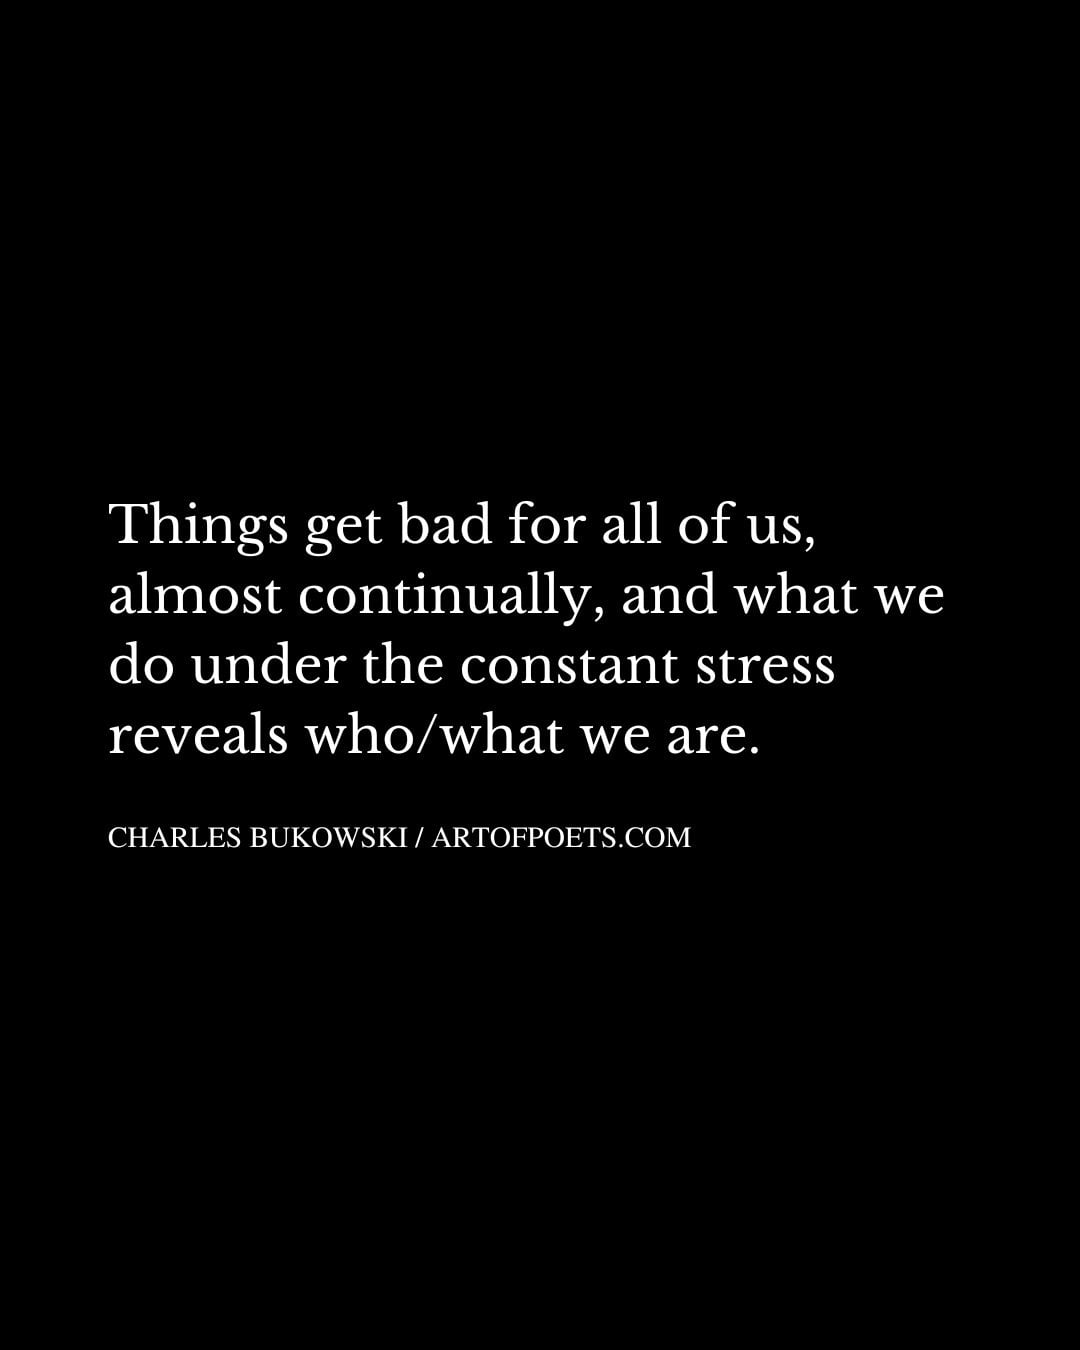 Things get bad for all of us almost continually and what we do under the constant stress reveals who what we are